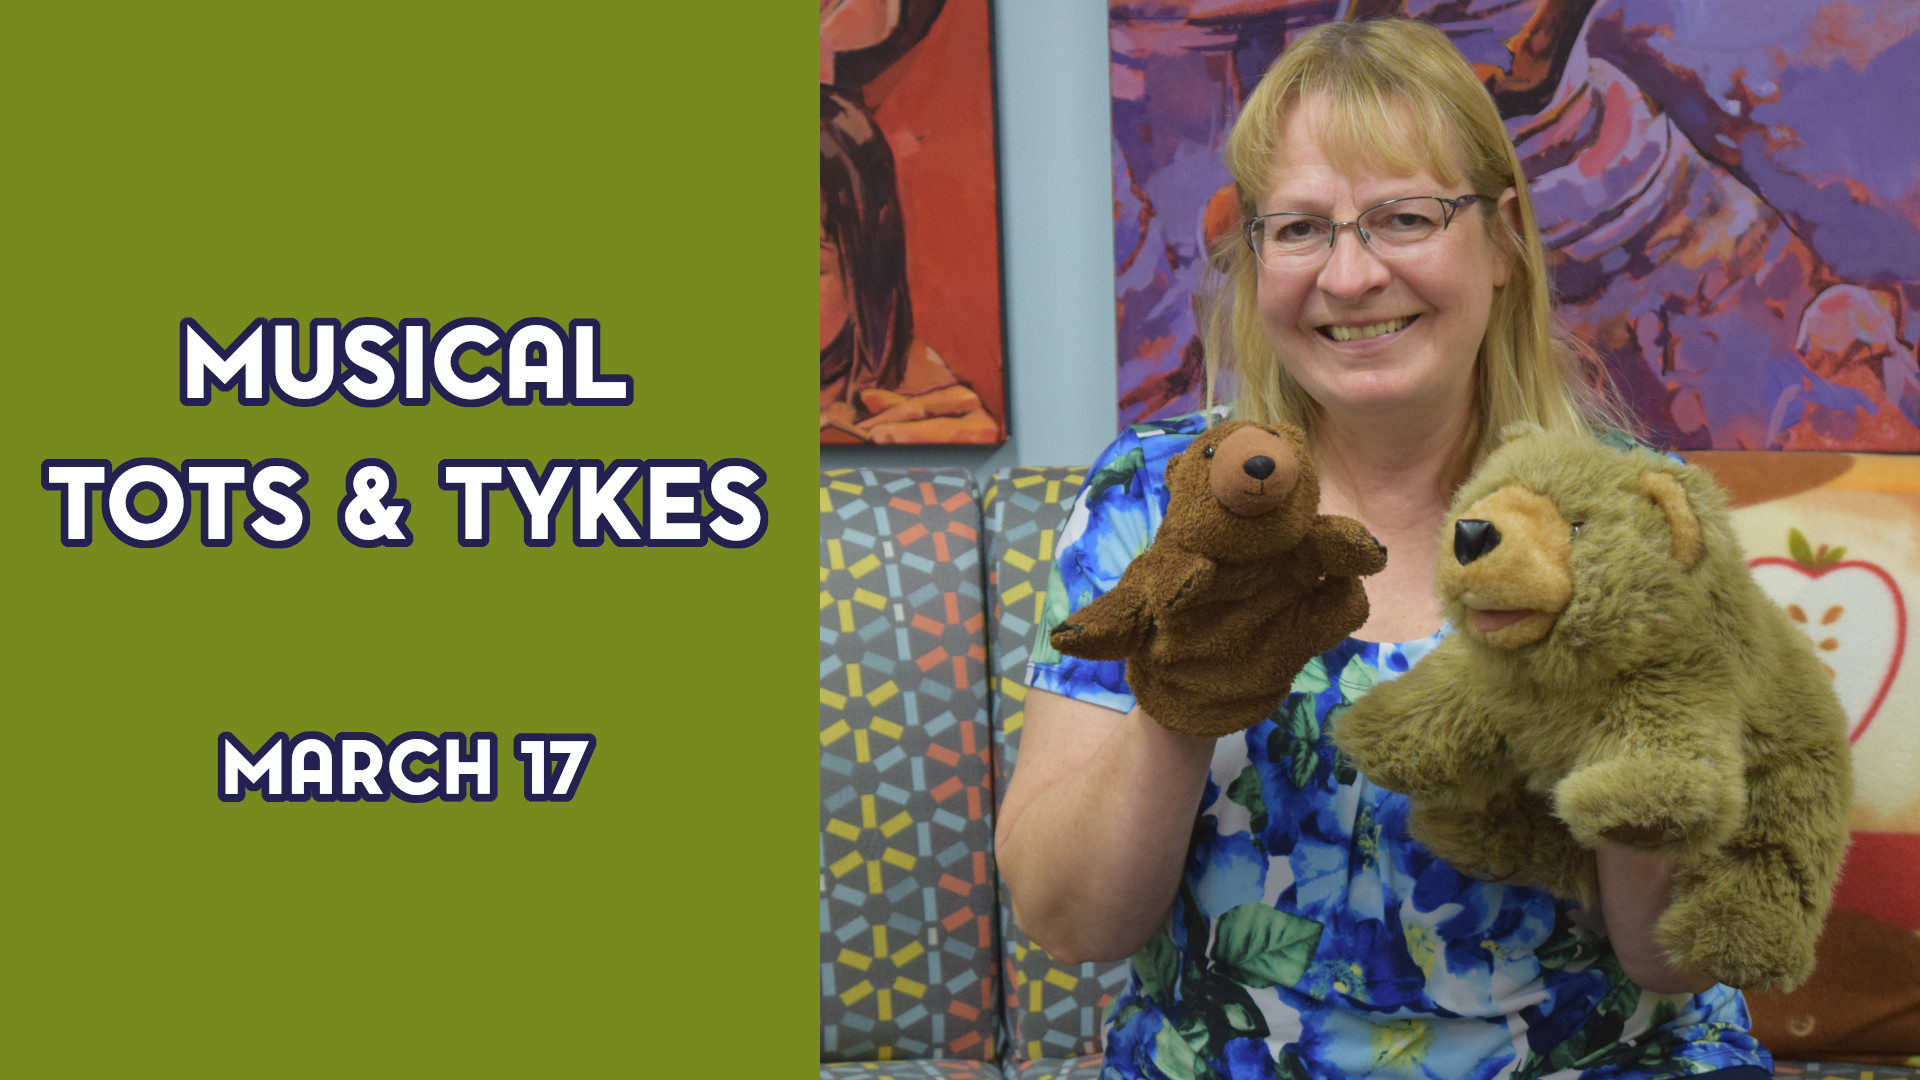 A woman holds stuffed animals next to the text "Musical Tots & Tykes March 17"